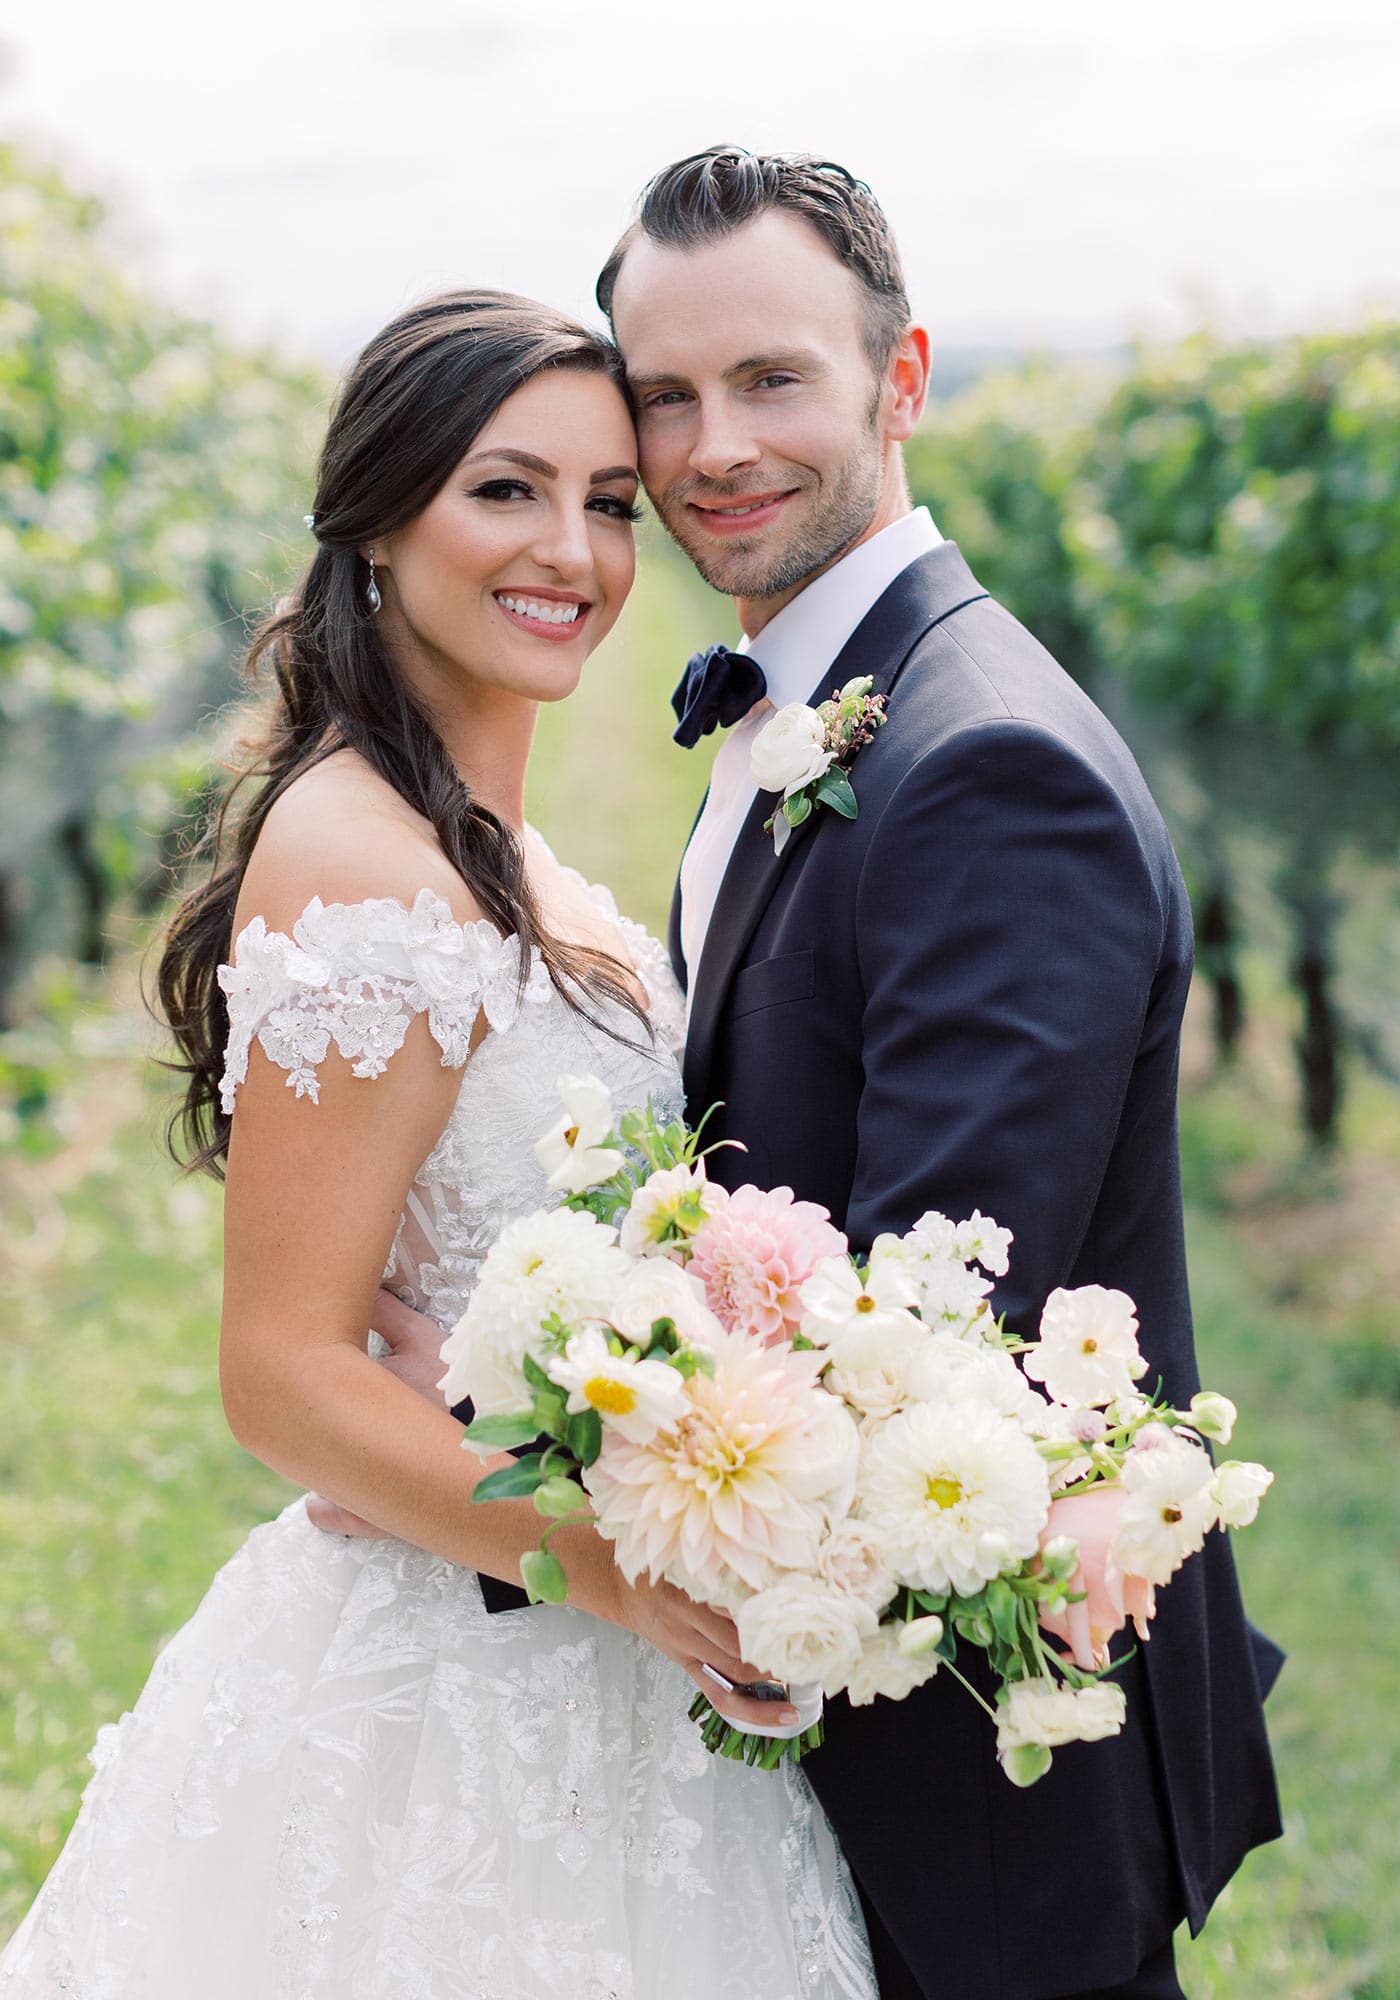 KirTuben Photography, Stone Tower Winery, The One Moment Events, Springvale Floral